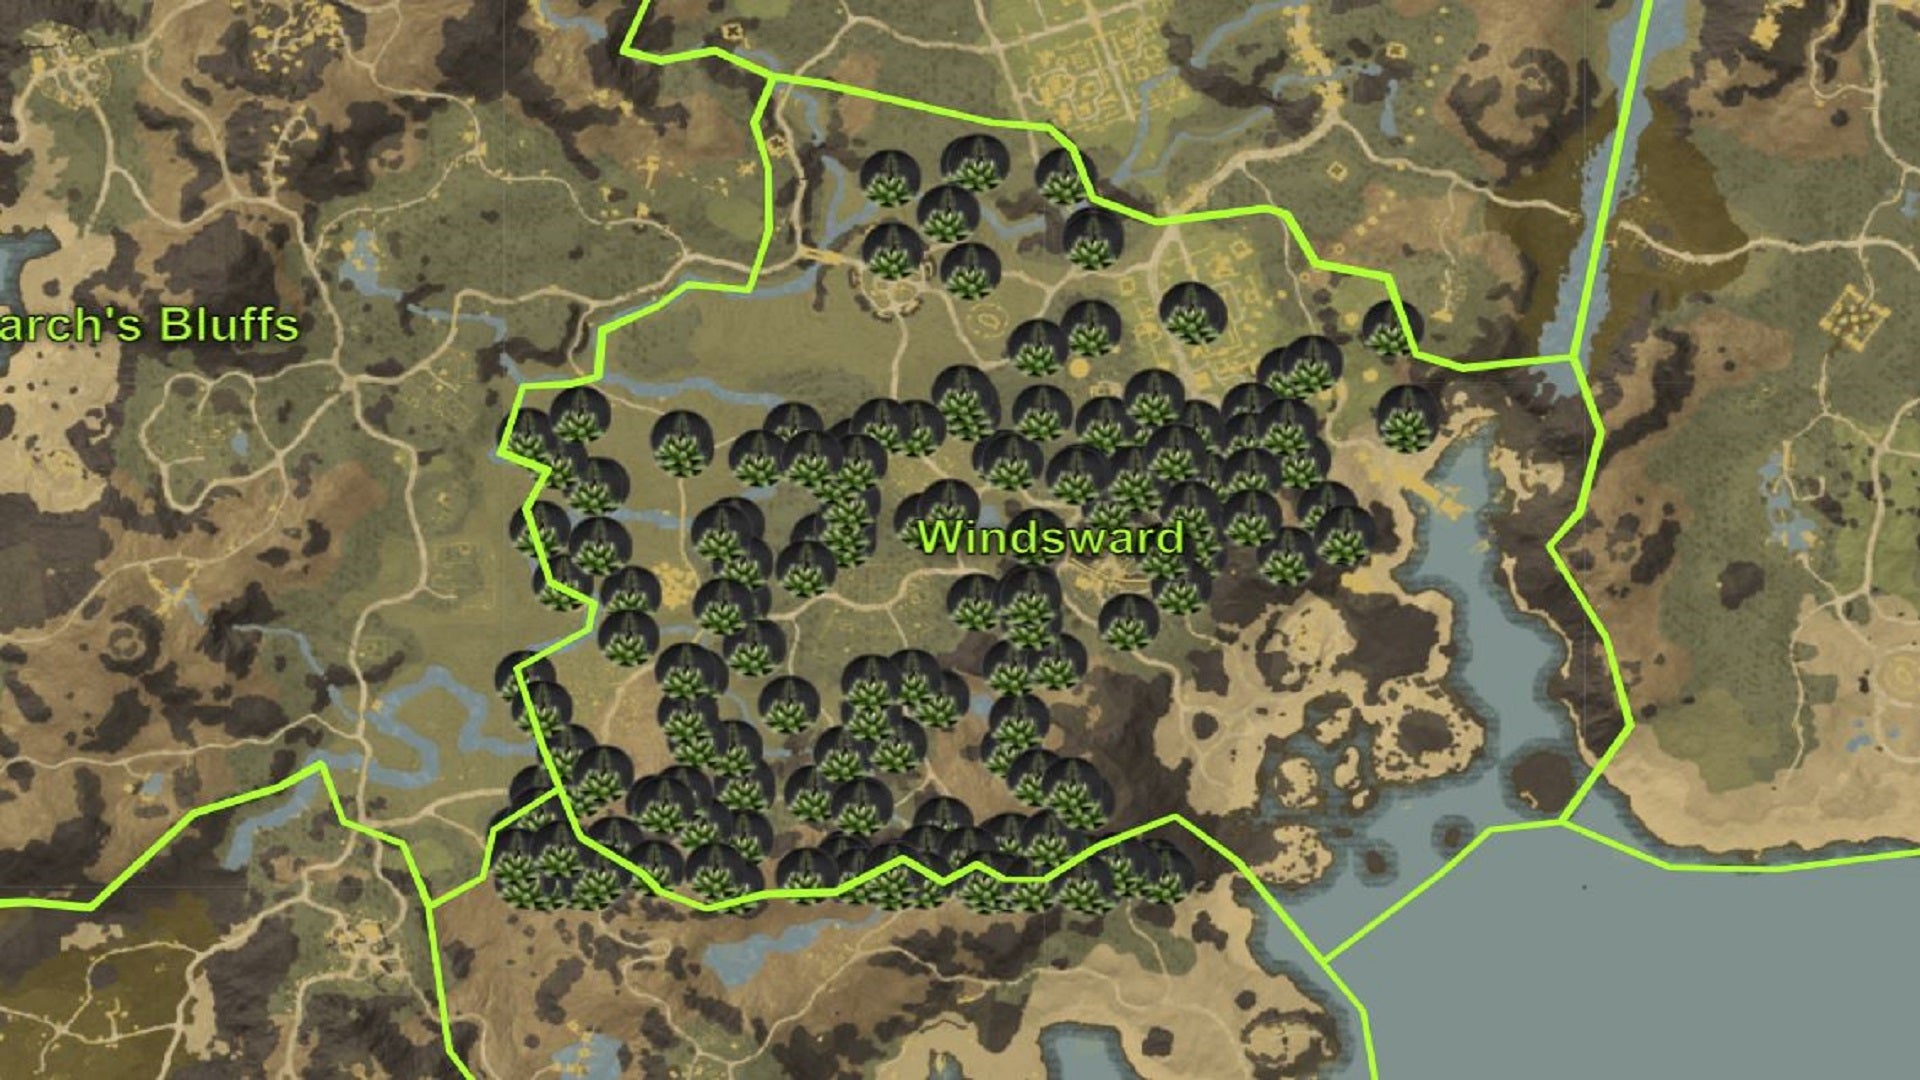 A zoomed-in map section of New World's Windsward region, showing Fronded Petalcap resource spawn locations.